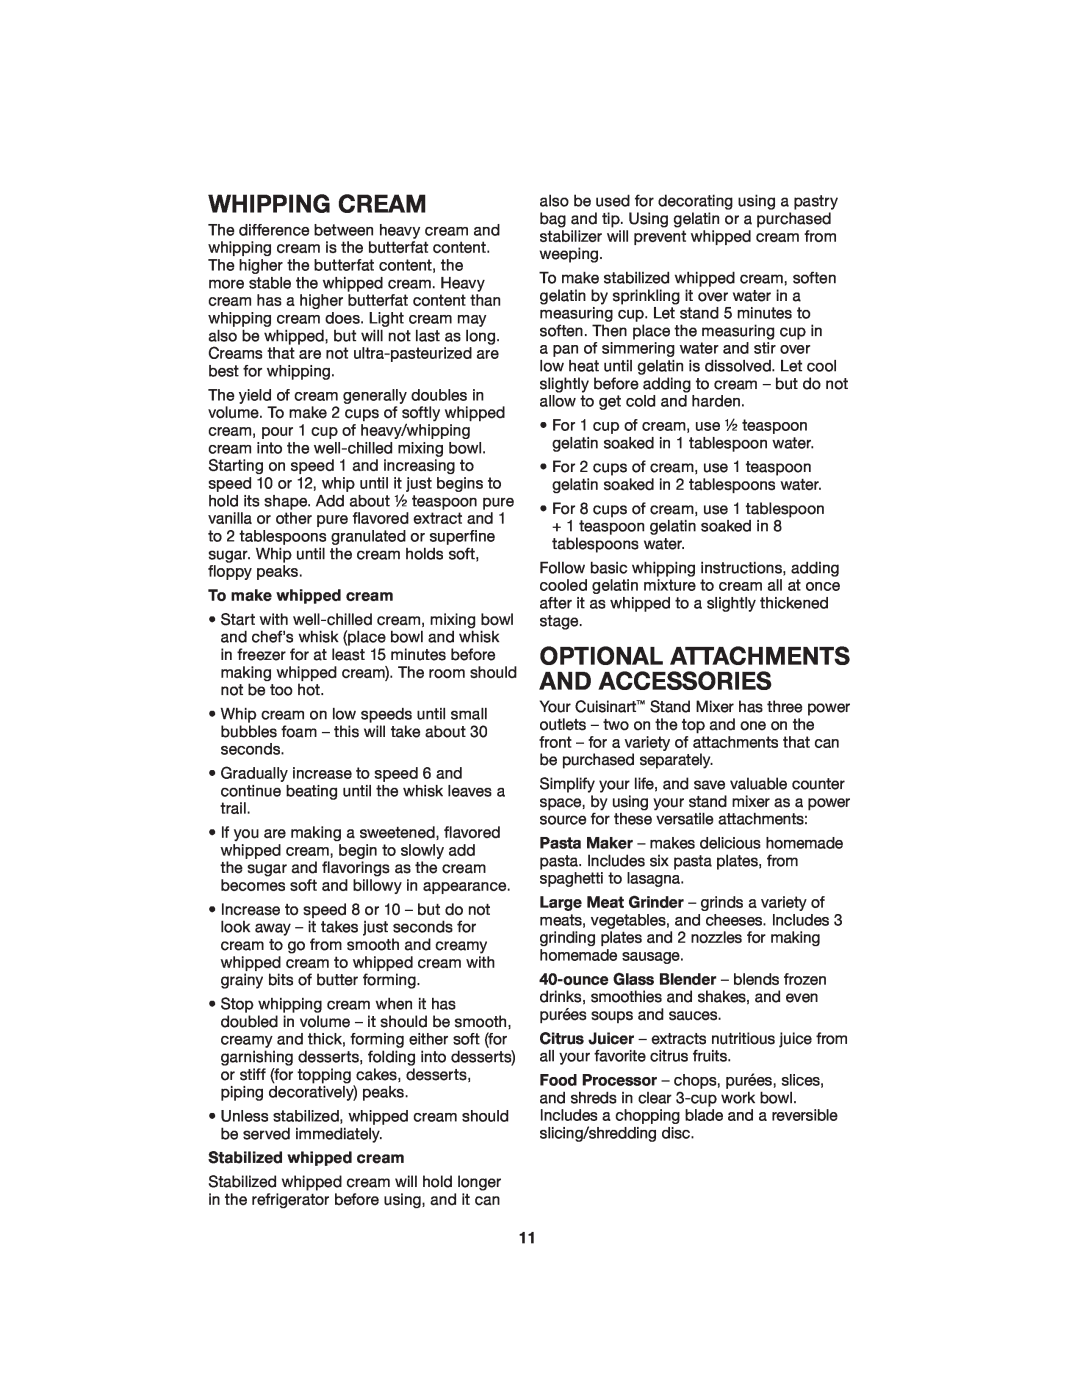 Cuisinart SM-55BK manual Whipping Cream, Optional Attachments And Accessories 